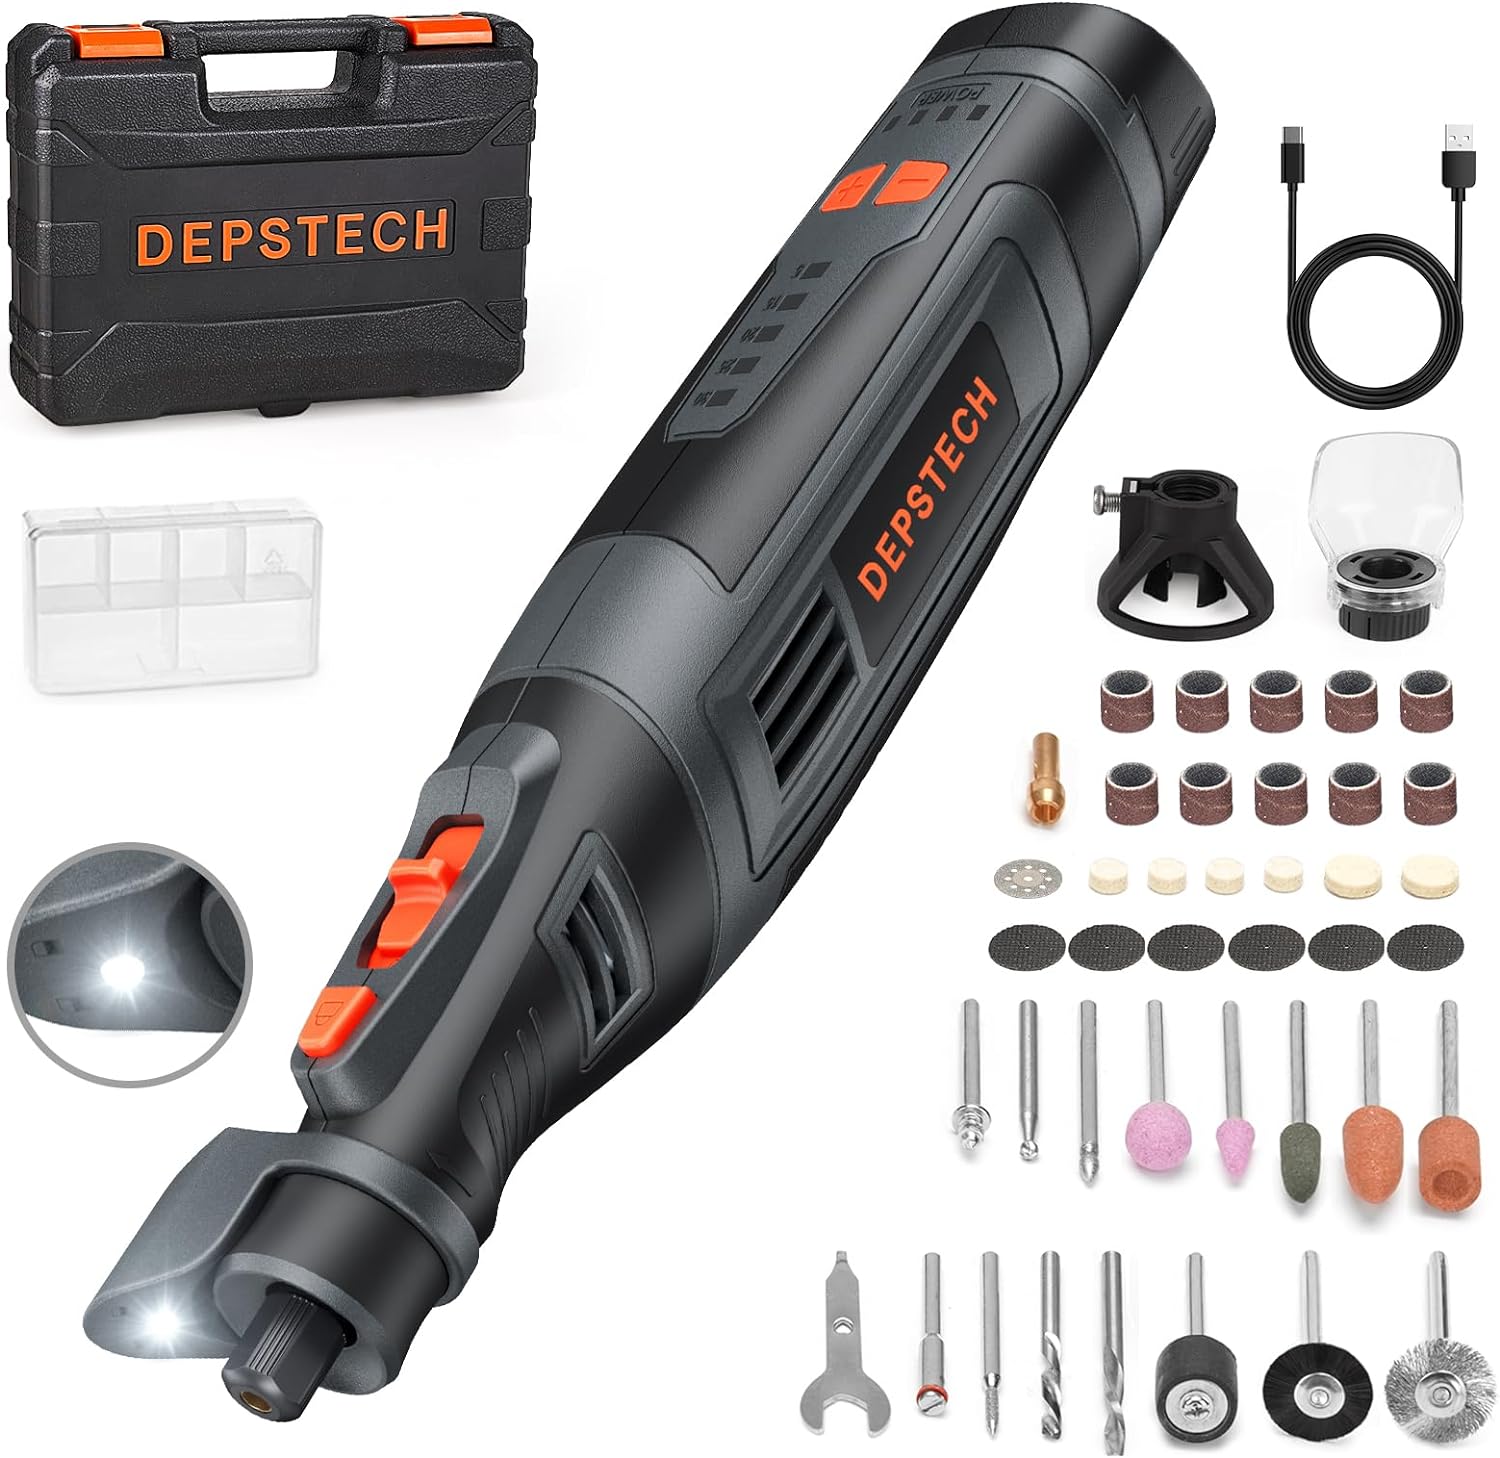 Depstech Cordless Rotary Tool Kit, 8V 2.5Ah Larger Battery, 5-Speed 30000Rpm Max, Led Work Light, Power Multi Tool 47Pcs Durable Accessories Set For Carving, Polishing, Sanding, Drilling, Diy Crafts